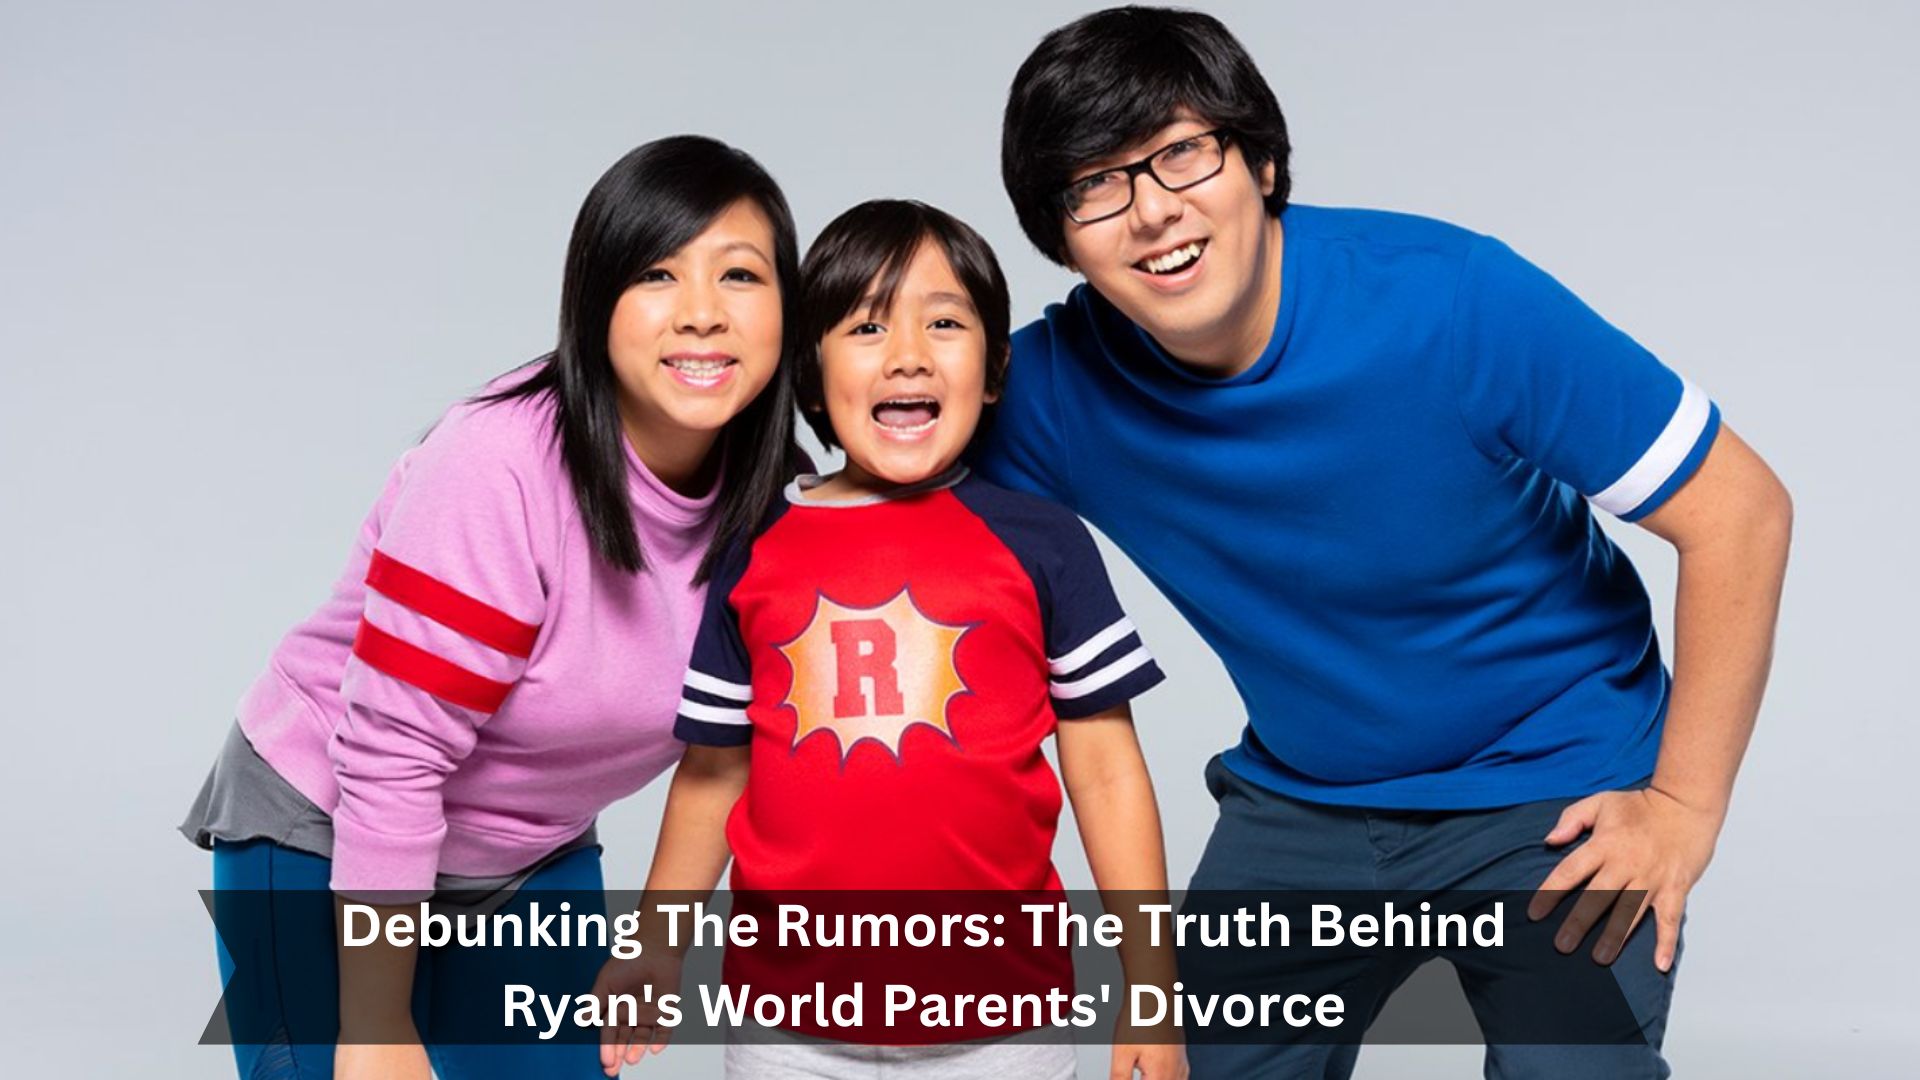 Debunking-The-Rumors-The-Truth-Behind-Ryans-World-Parents-Divorce